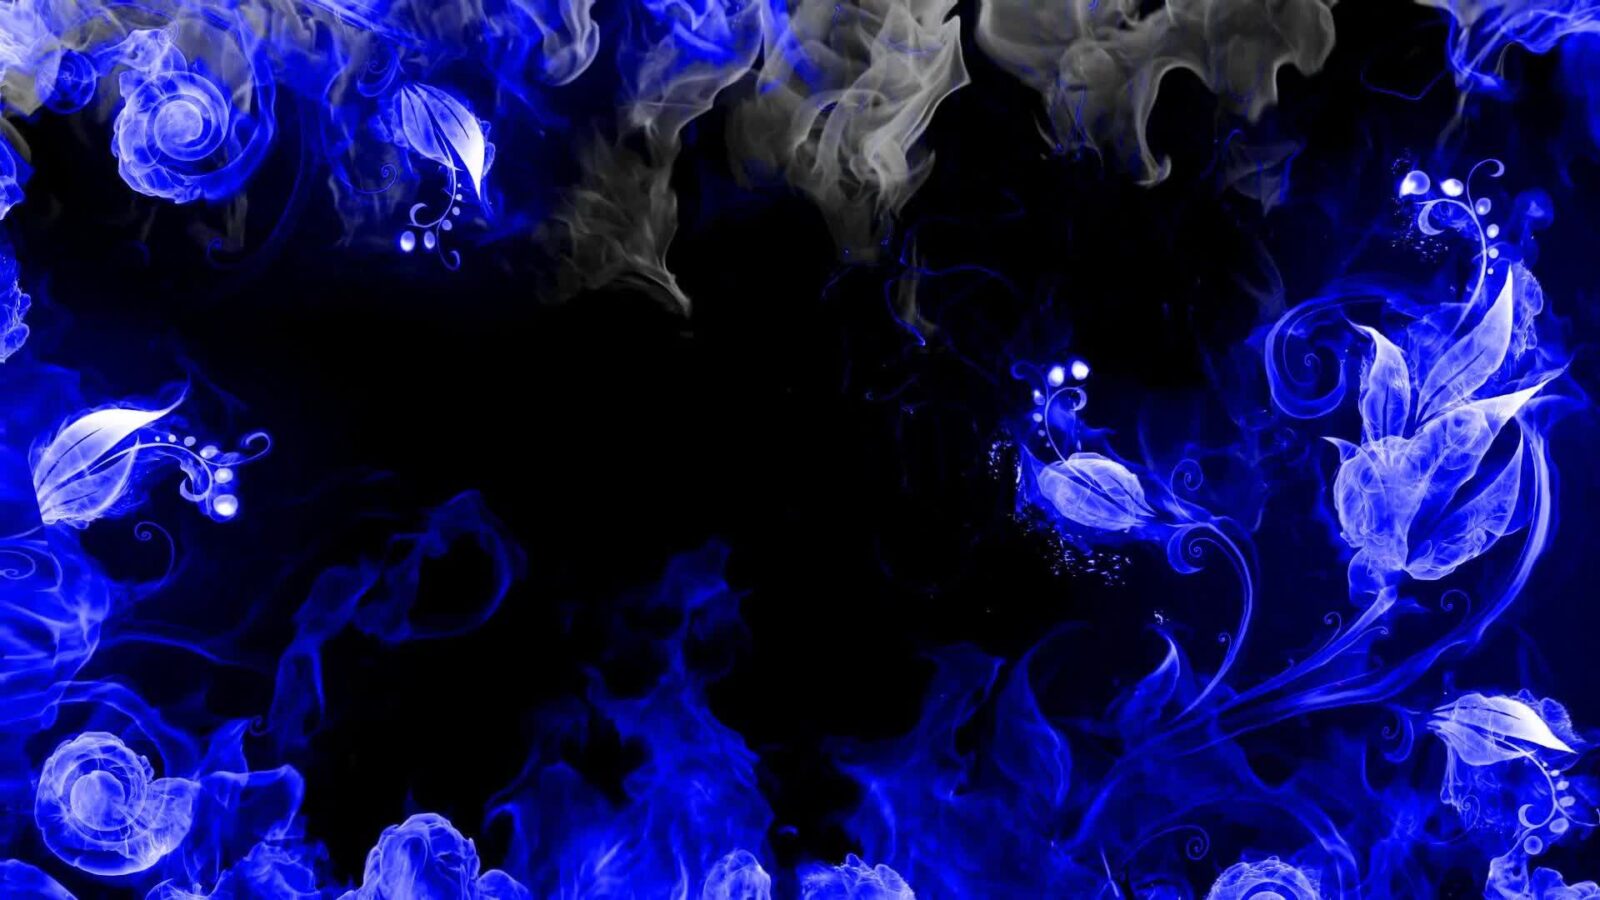 Blue Flowers and Dark Smoke Abstract Artwork - Free Live Wallpaper